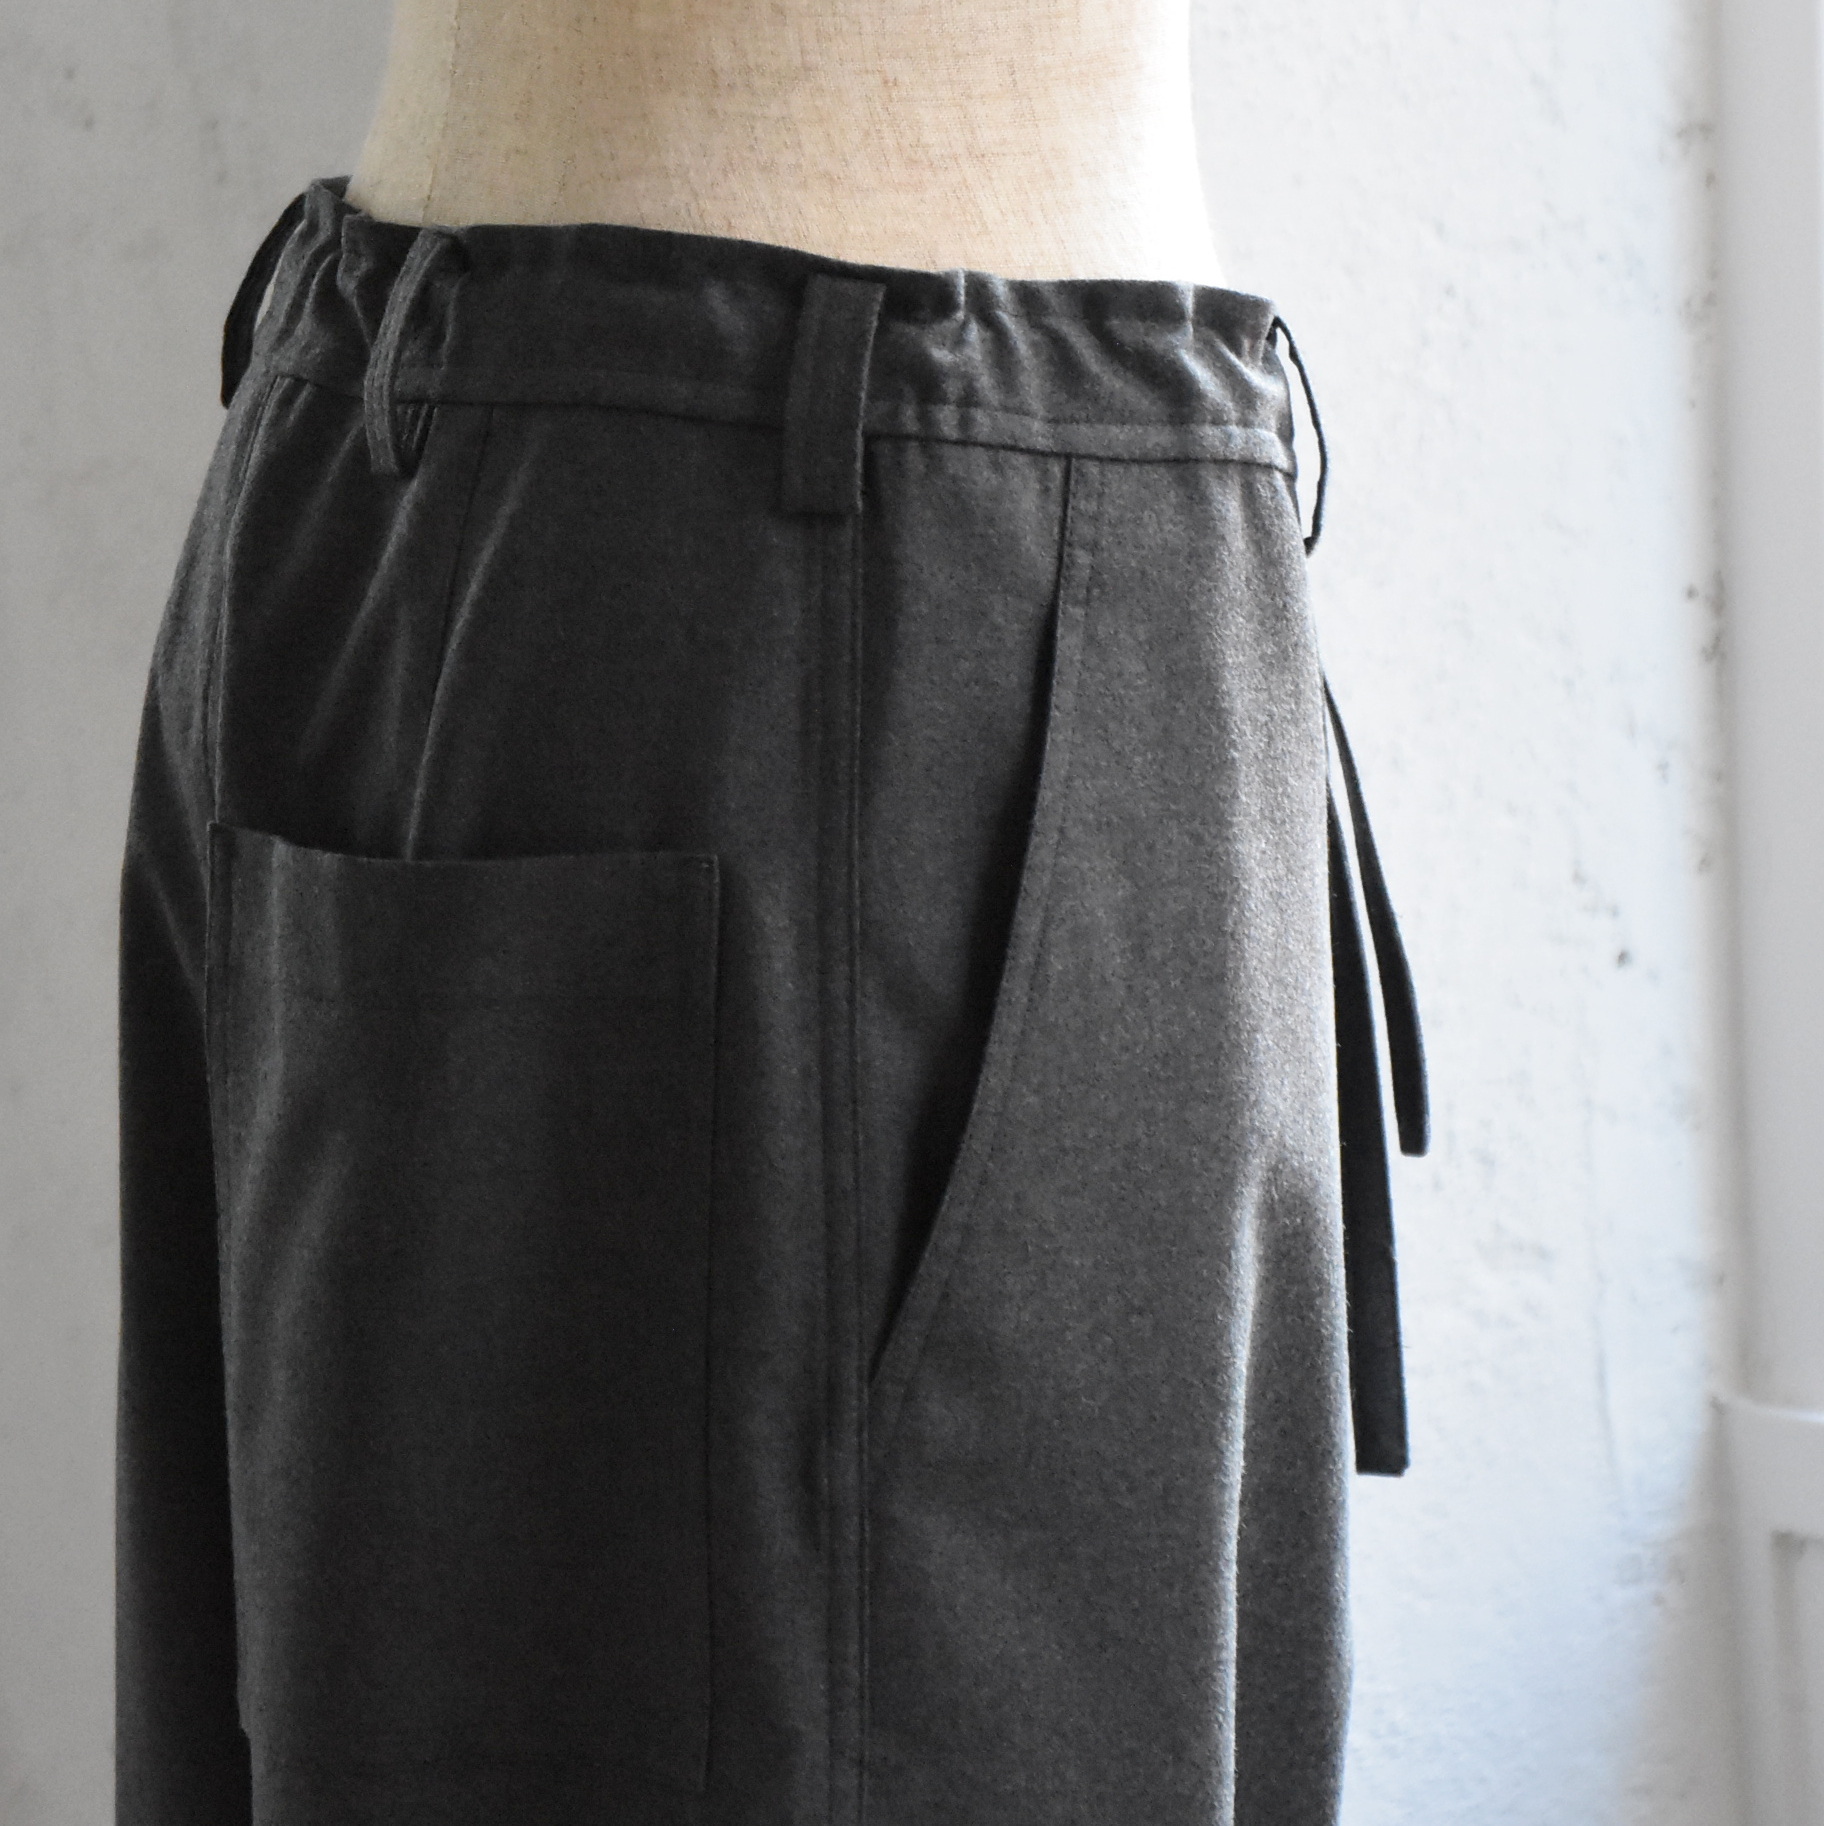 SOFIE D'HOORE(ソフィードール) / Low crotch pants with zip and drawstring【2色展開】(11)